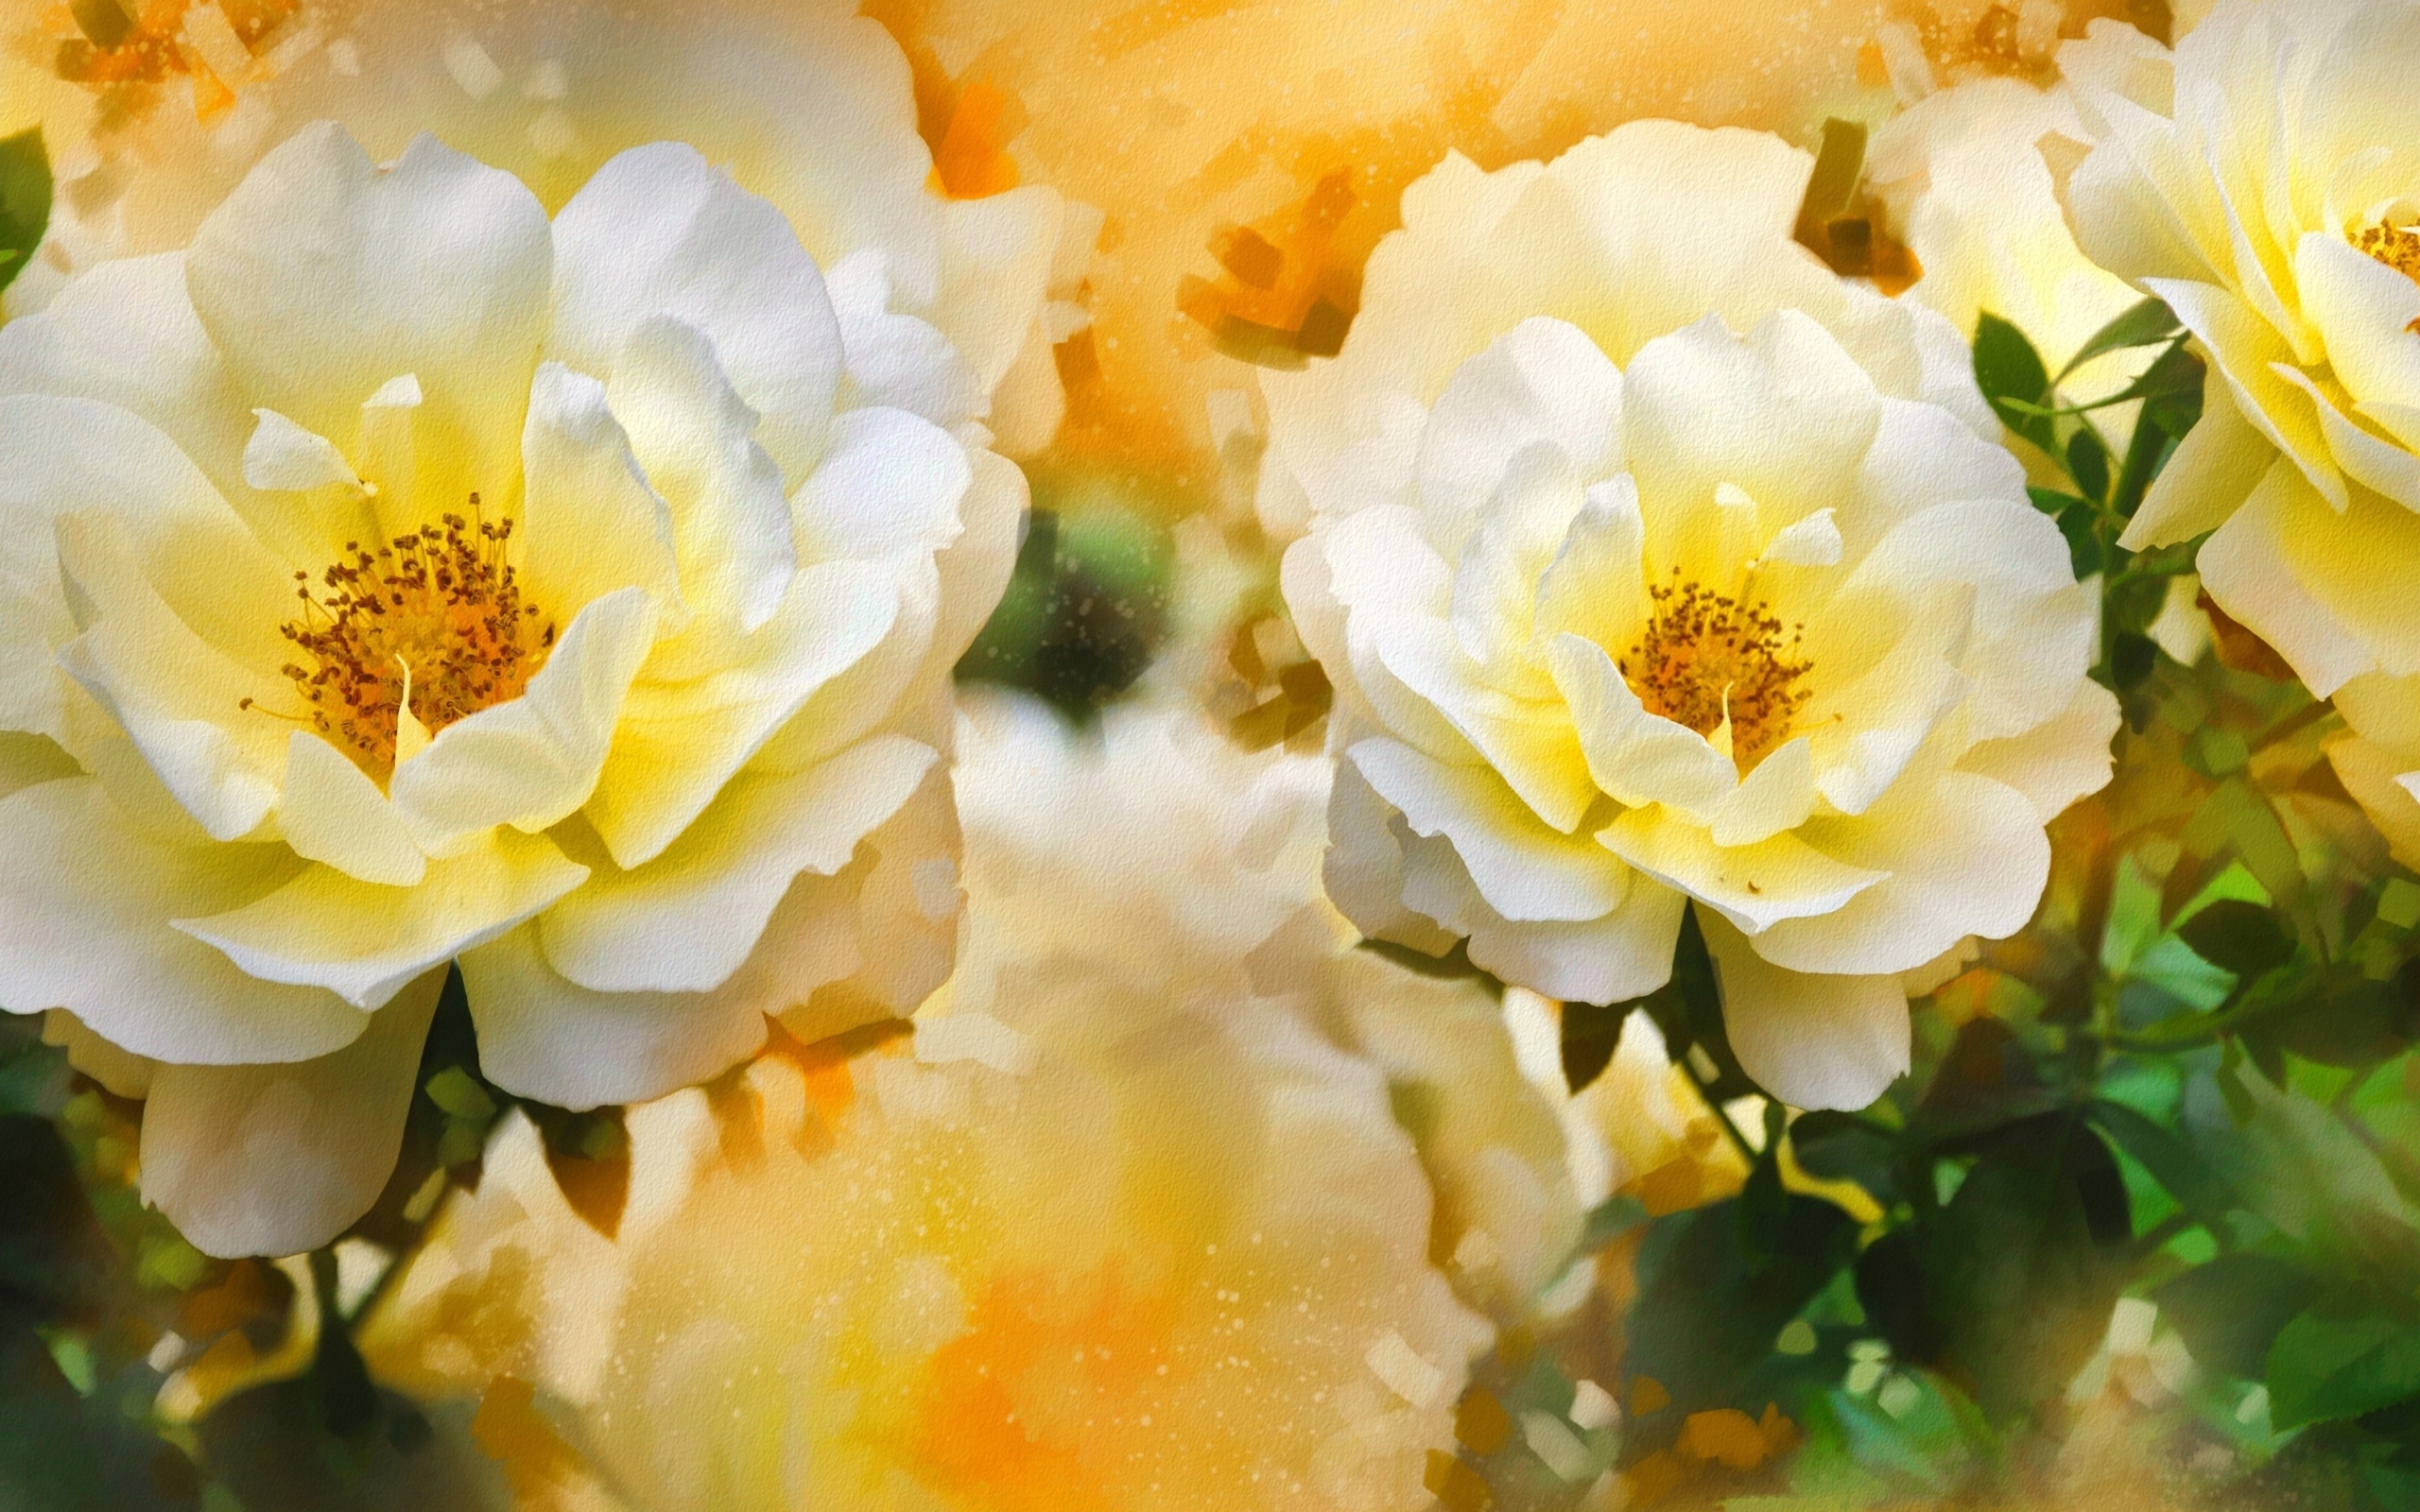 Beautiful painted blooming white roses